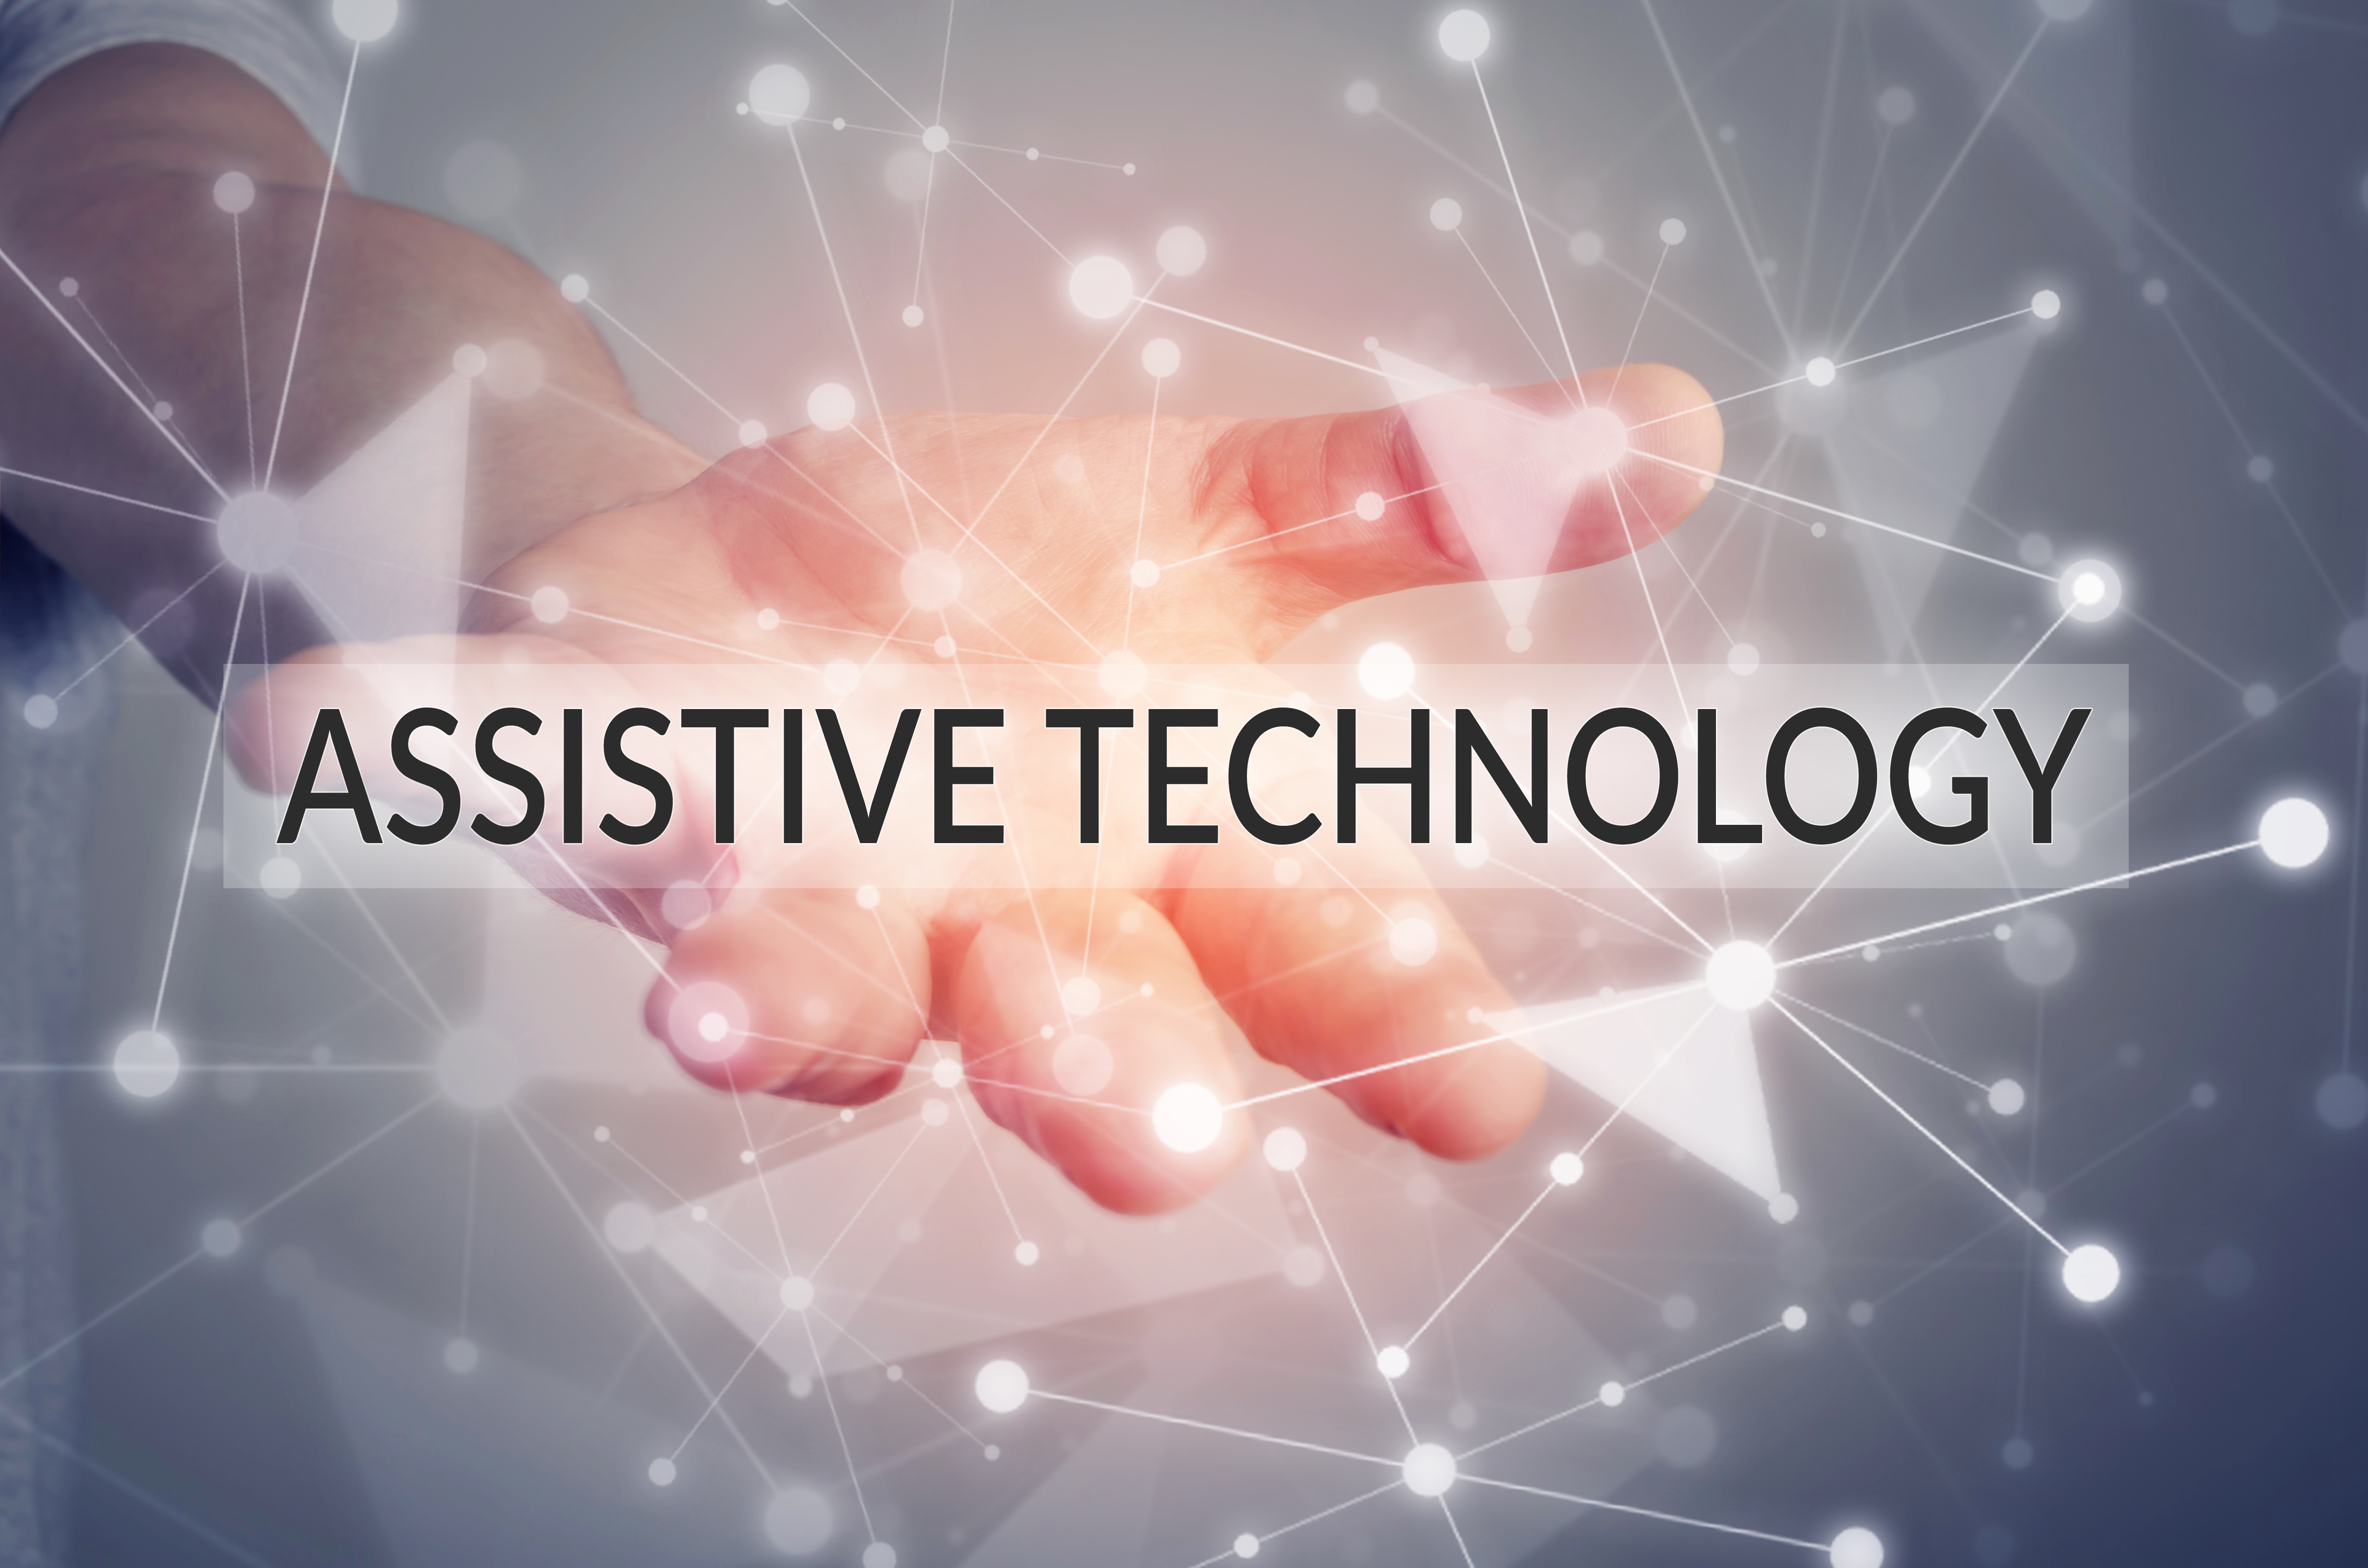 A hand reaching out to you with the words 'assistive technology' written over the top of the image.